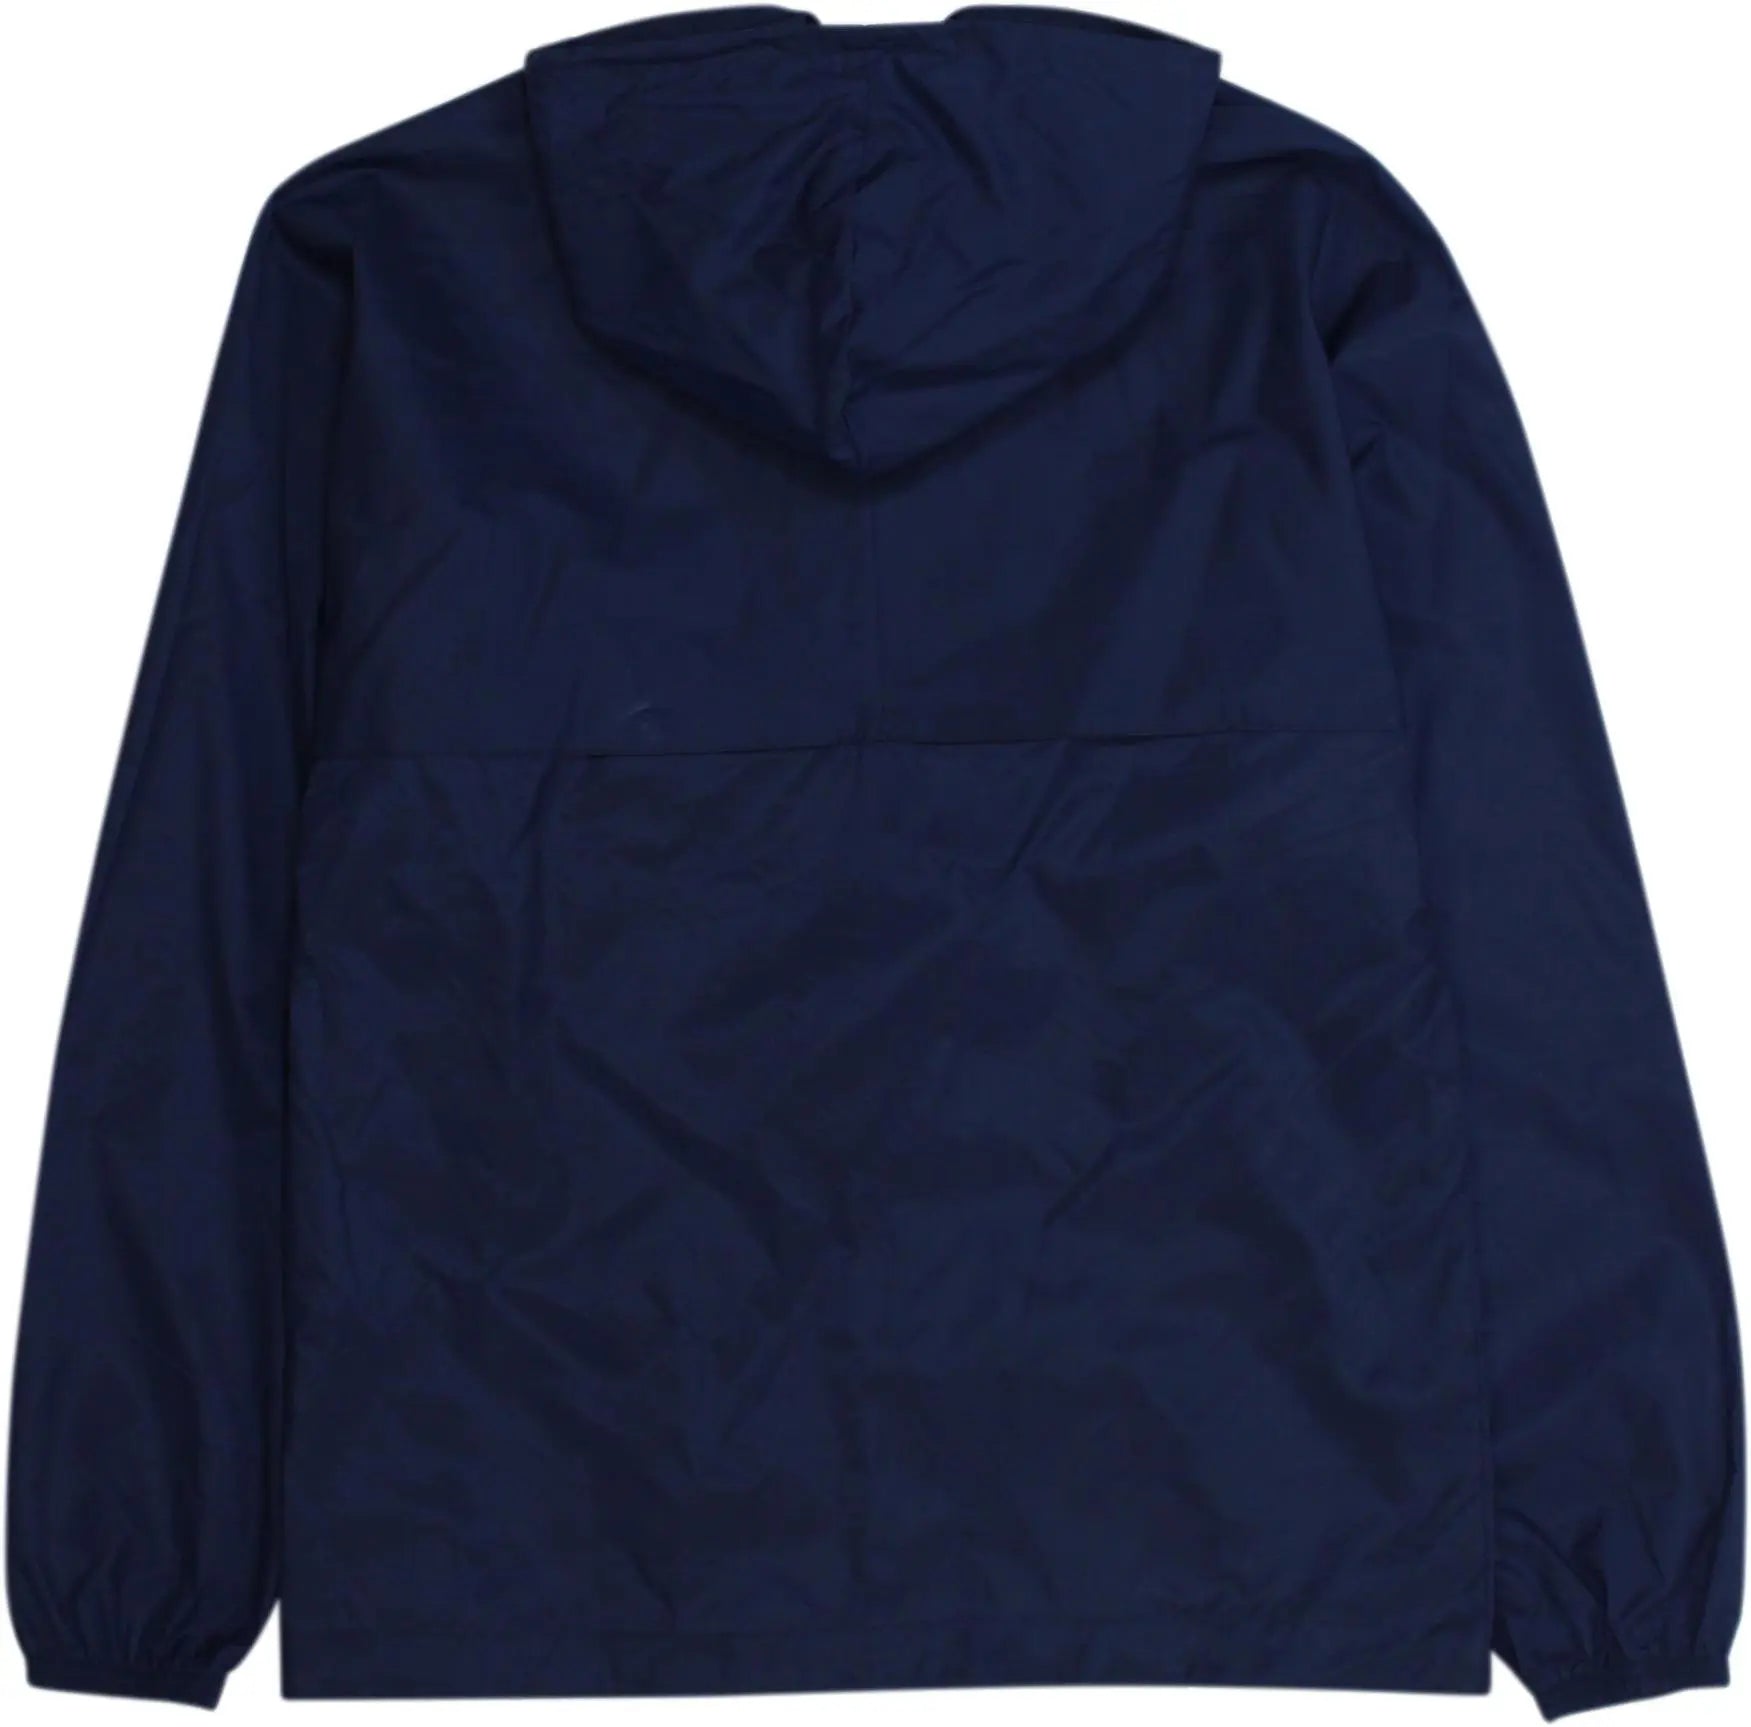 Adidas - Blue Windbreaker by Adidas- ThriftTale.com - Vintage and second handclothing